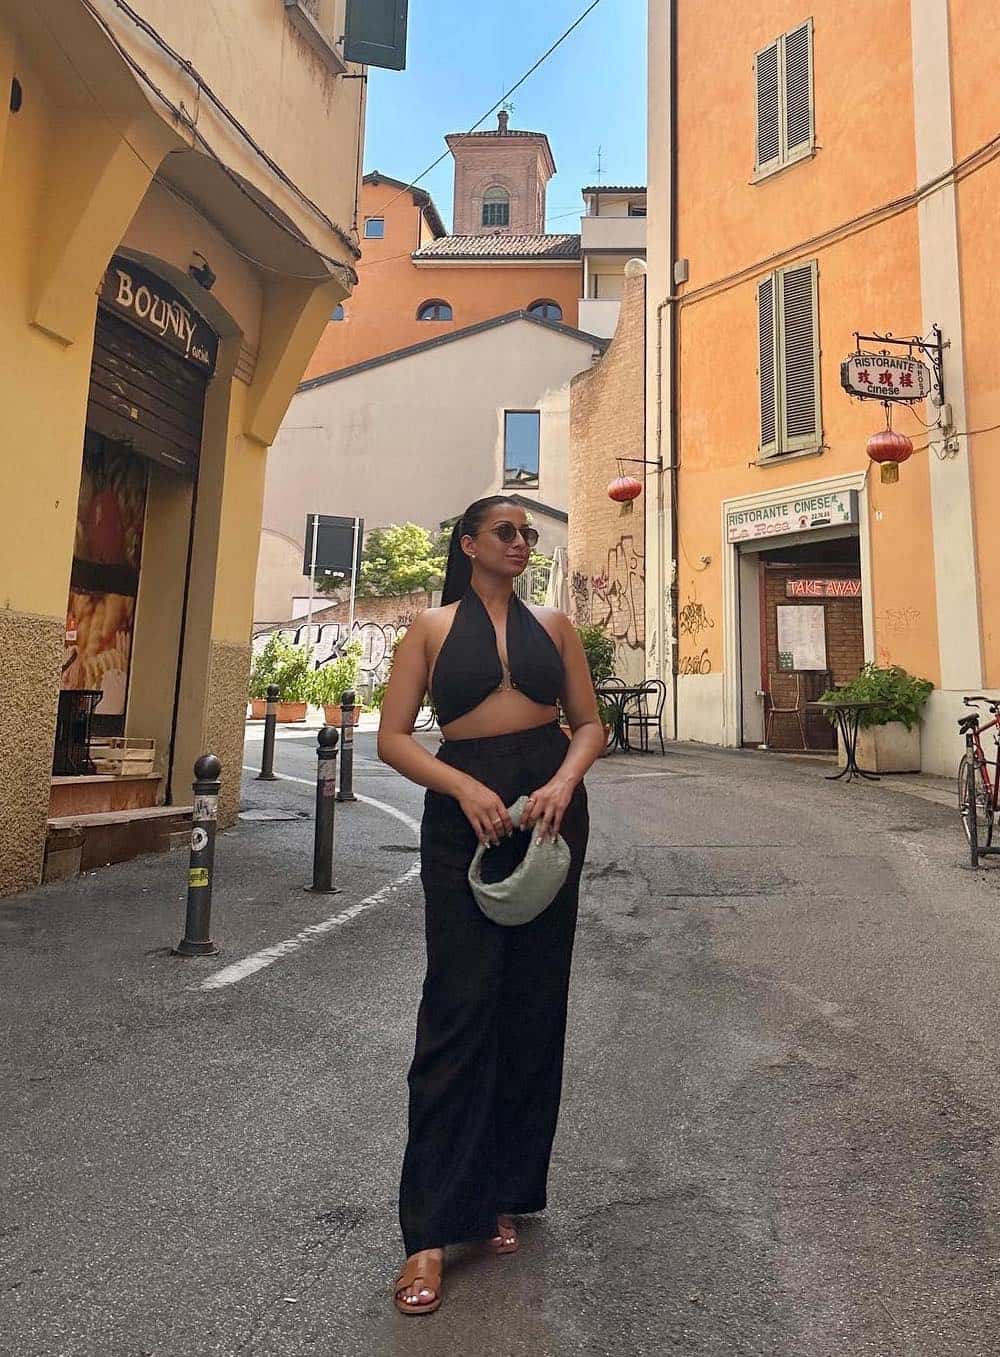 Woman wearing a long black skirt and crop top with brown sandals in Italy.